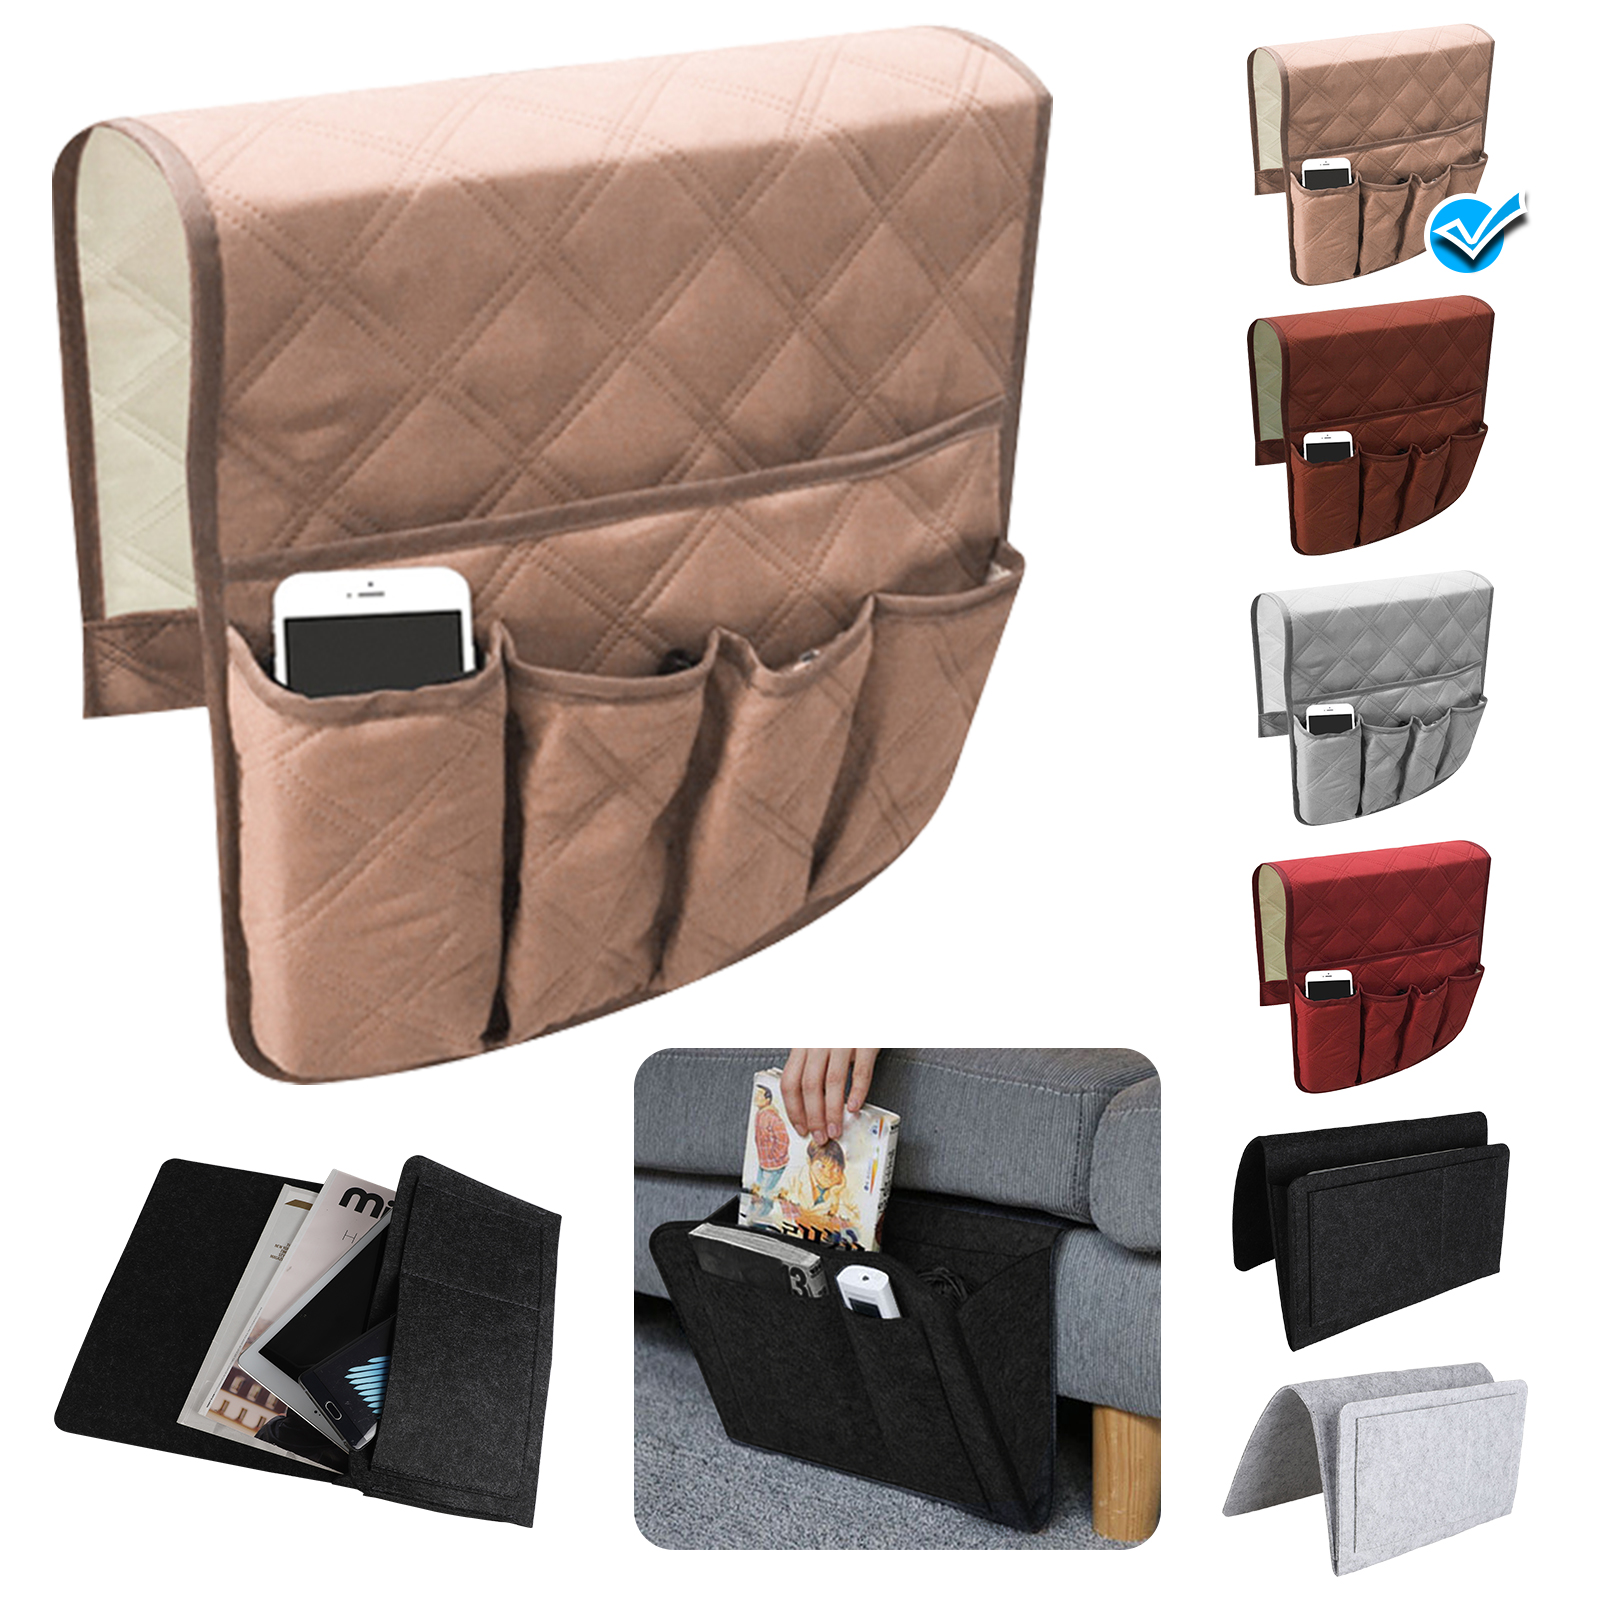 Canvas Chair Beside Storage Bag Space Saver for Phone Remote Control Holder Beige Book Magazines Sofa Armrest Caddy Organizer with 5 Pockets for Couch Armchair Loveseat Glasses